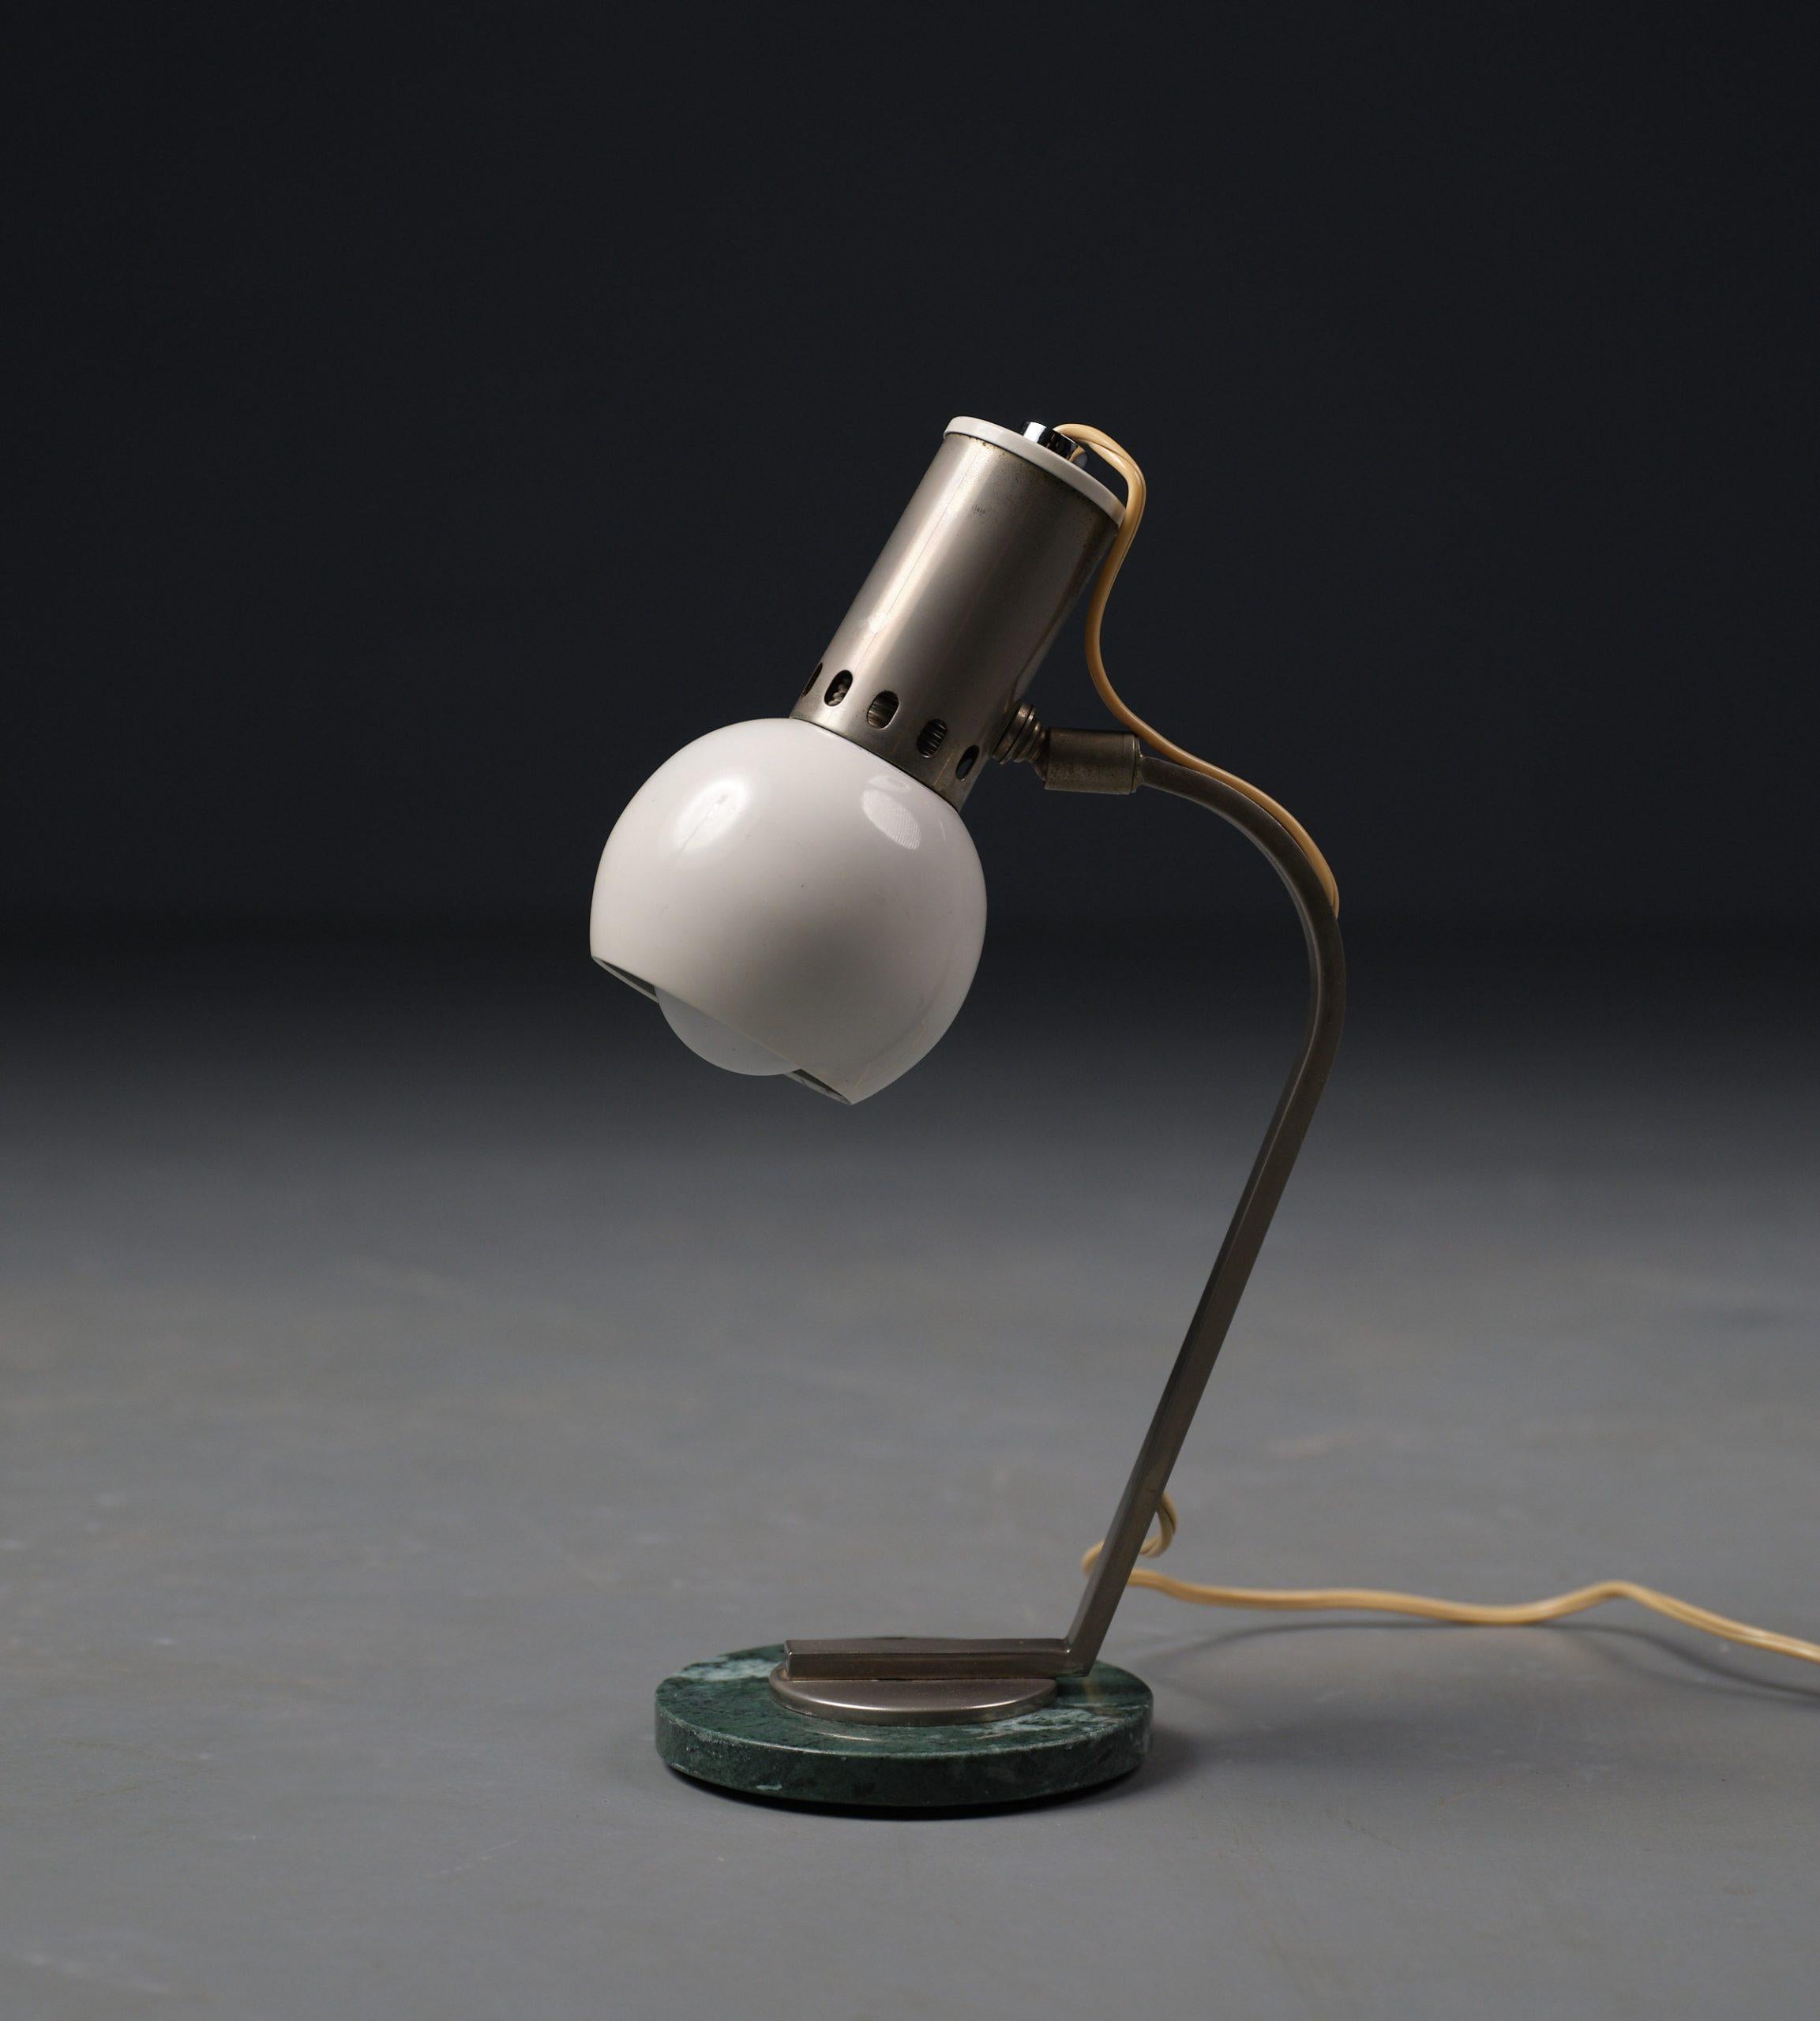 This table lamp is a pristine example of Italian design from the 1950s, encapsulating an era renowned for its innovative and stylish approach to everyday objects. The lamp stands in excellent condition, its longevity a testament to the quality of